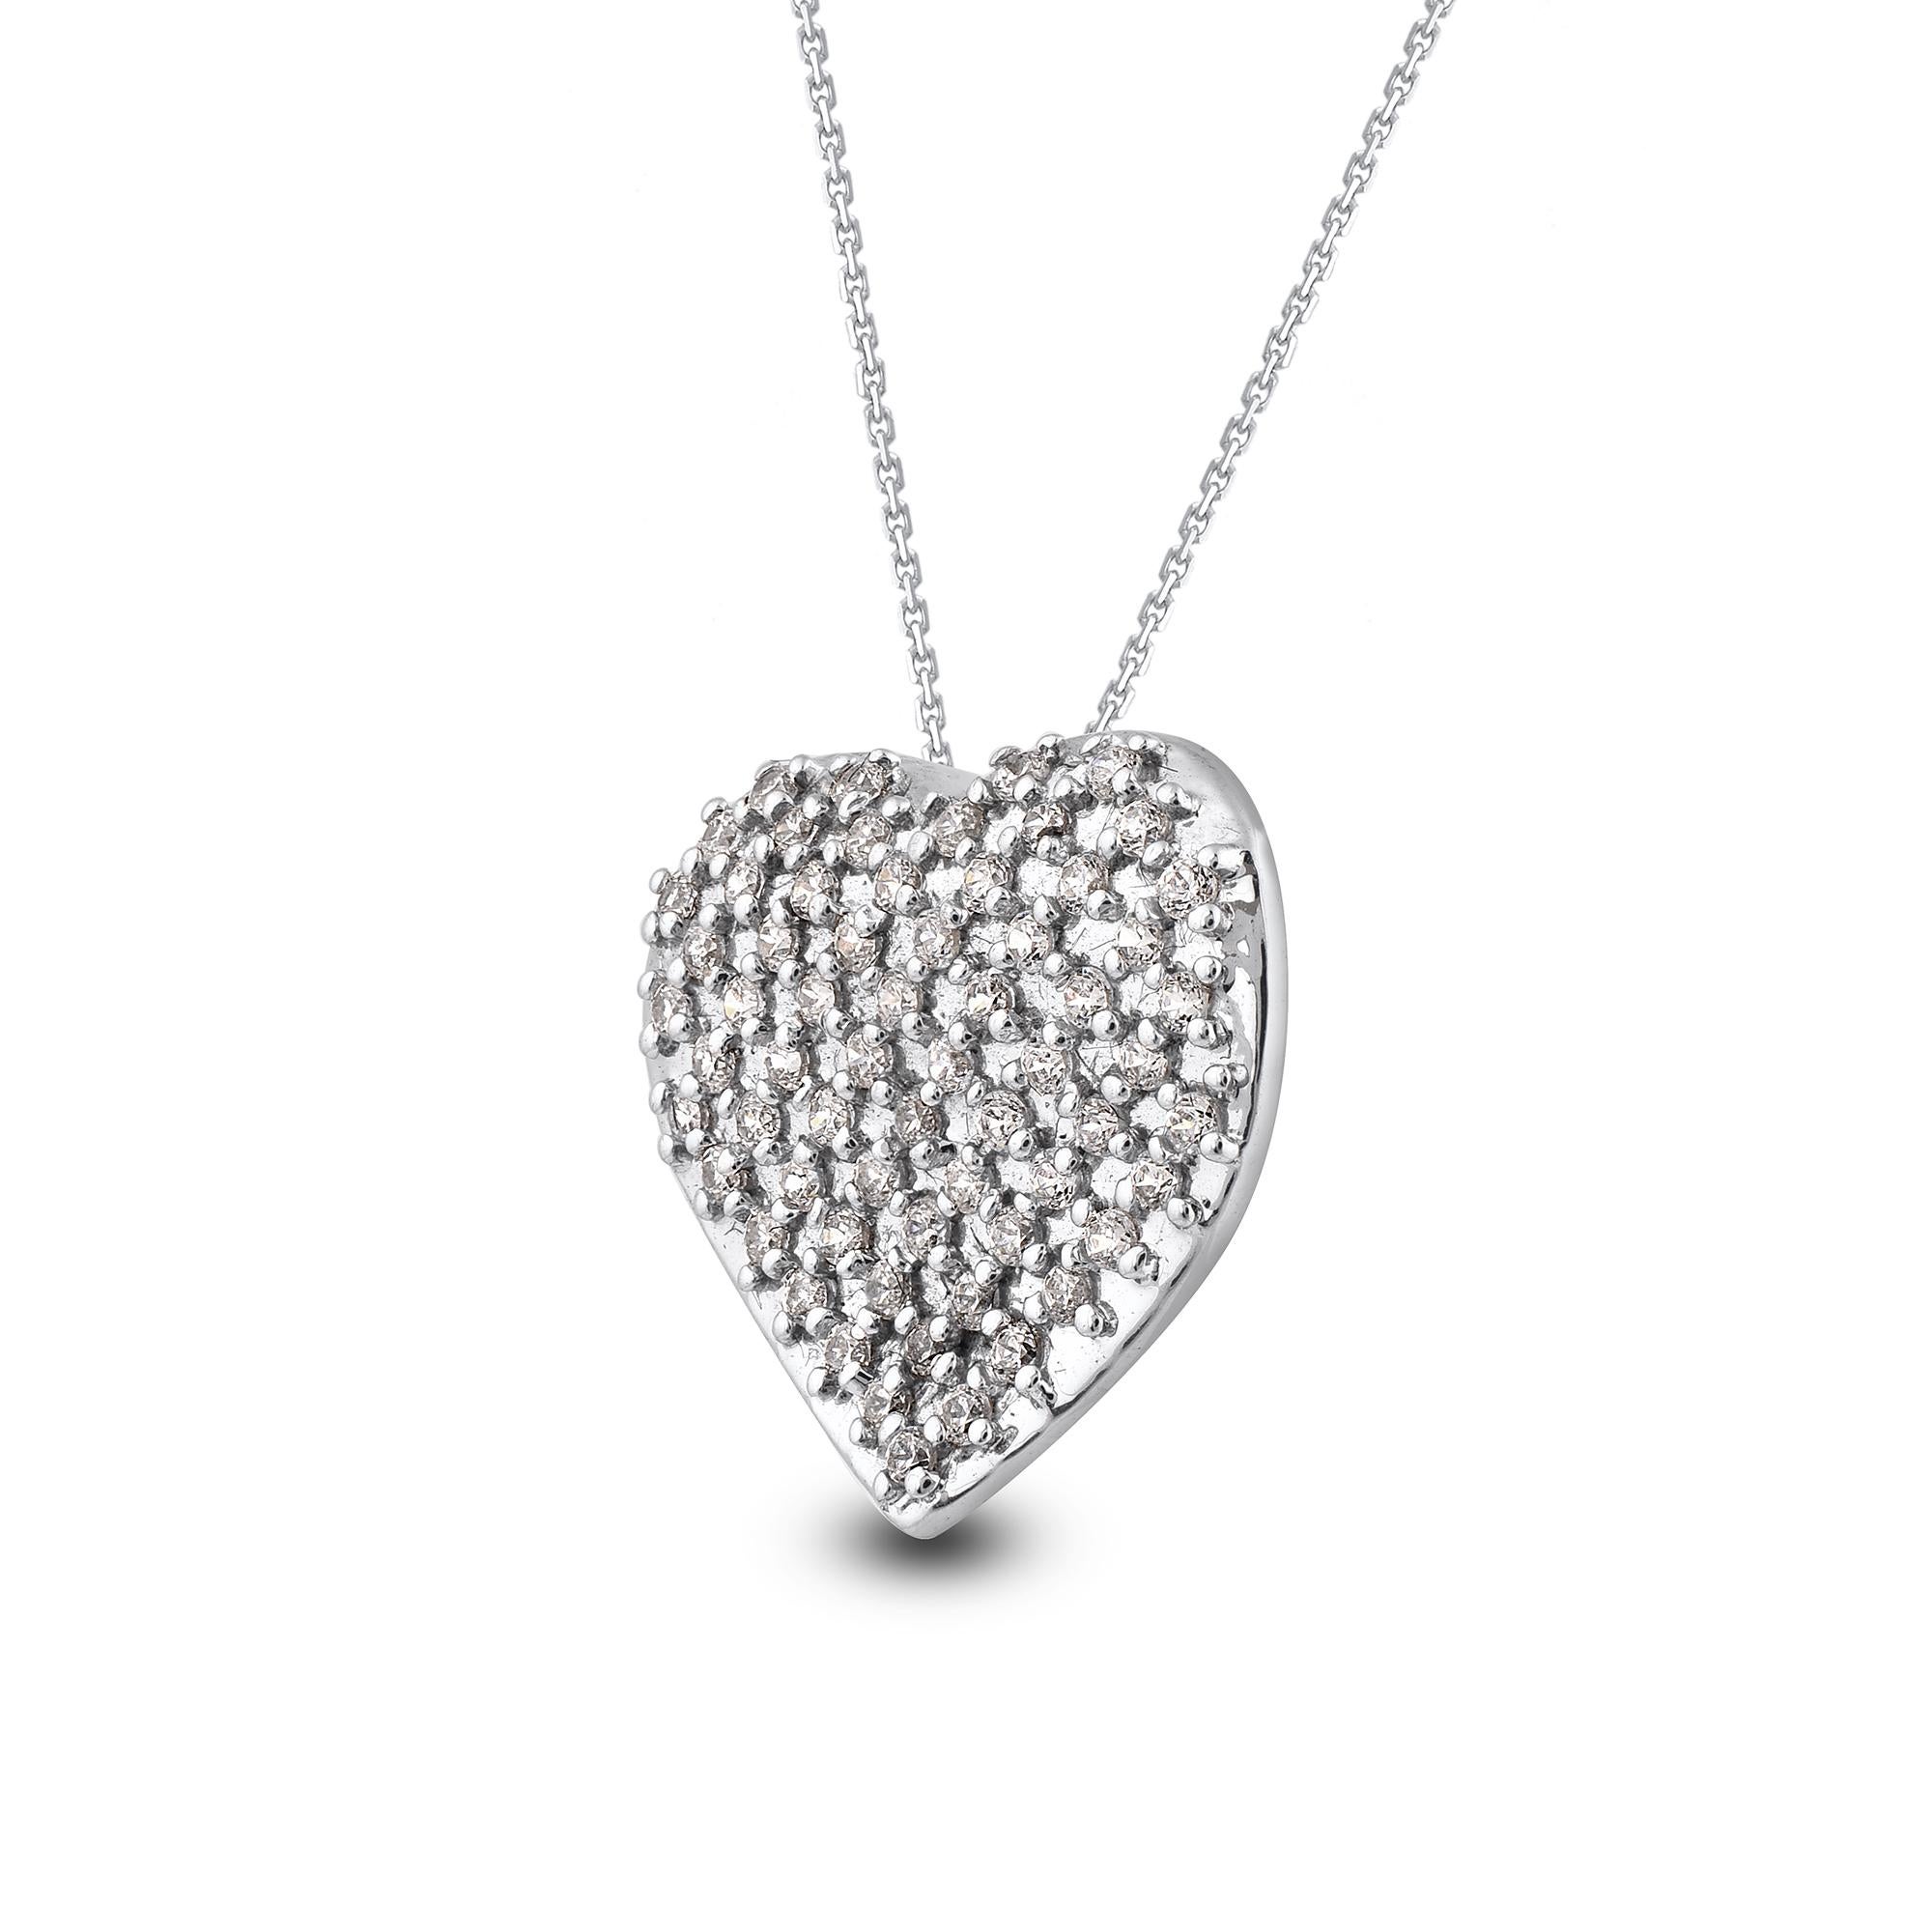 Bring charm to your look with this diamond heart pendant. The pendant is crafted from 14 karat white gold and features 64 round brilliant cut diamond set in bead setting and a high polish finish complete the brilliant sophistication of this